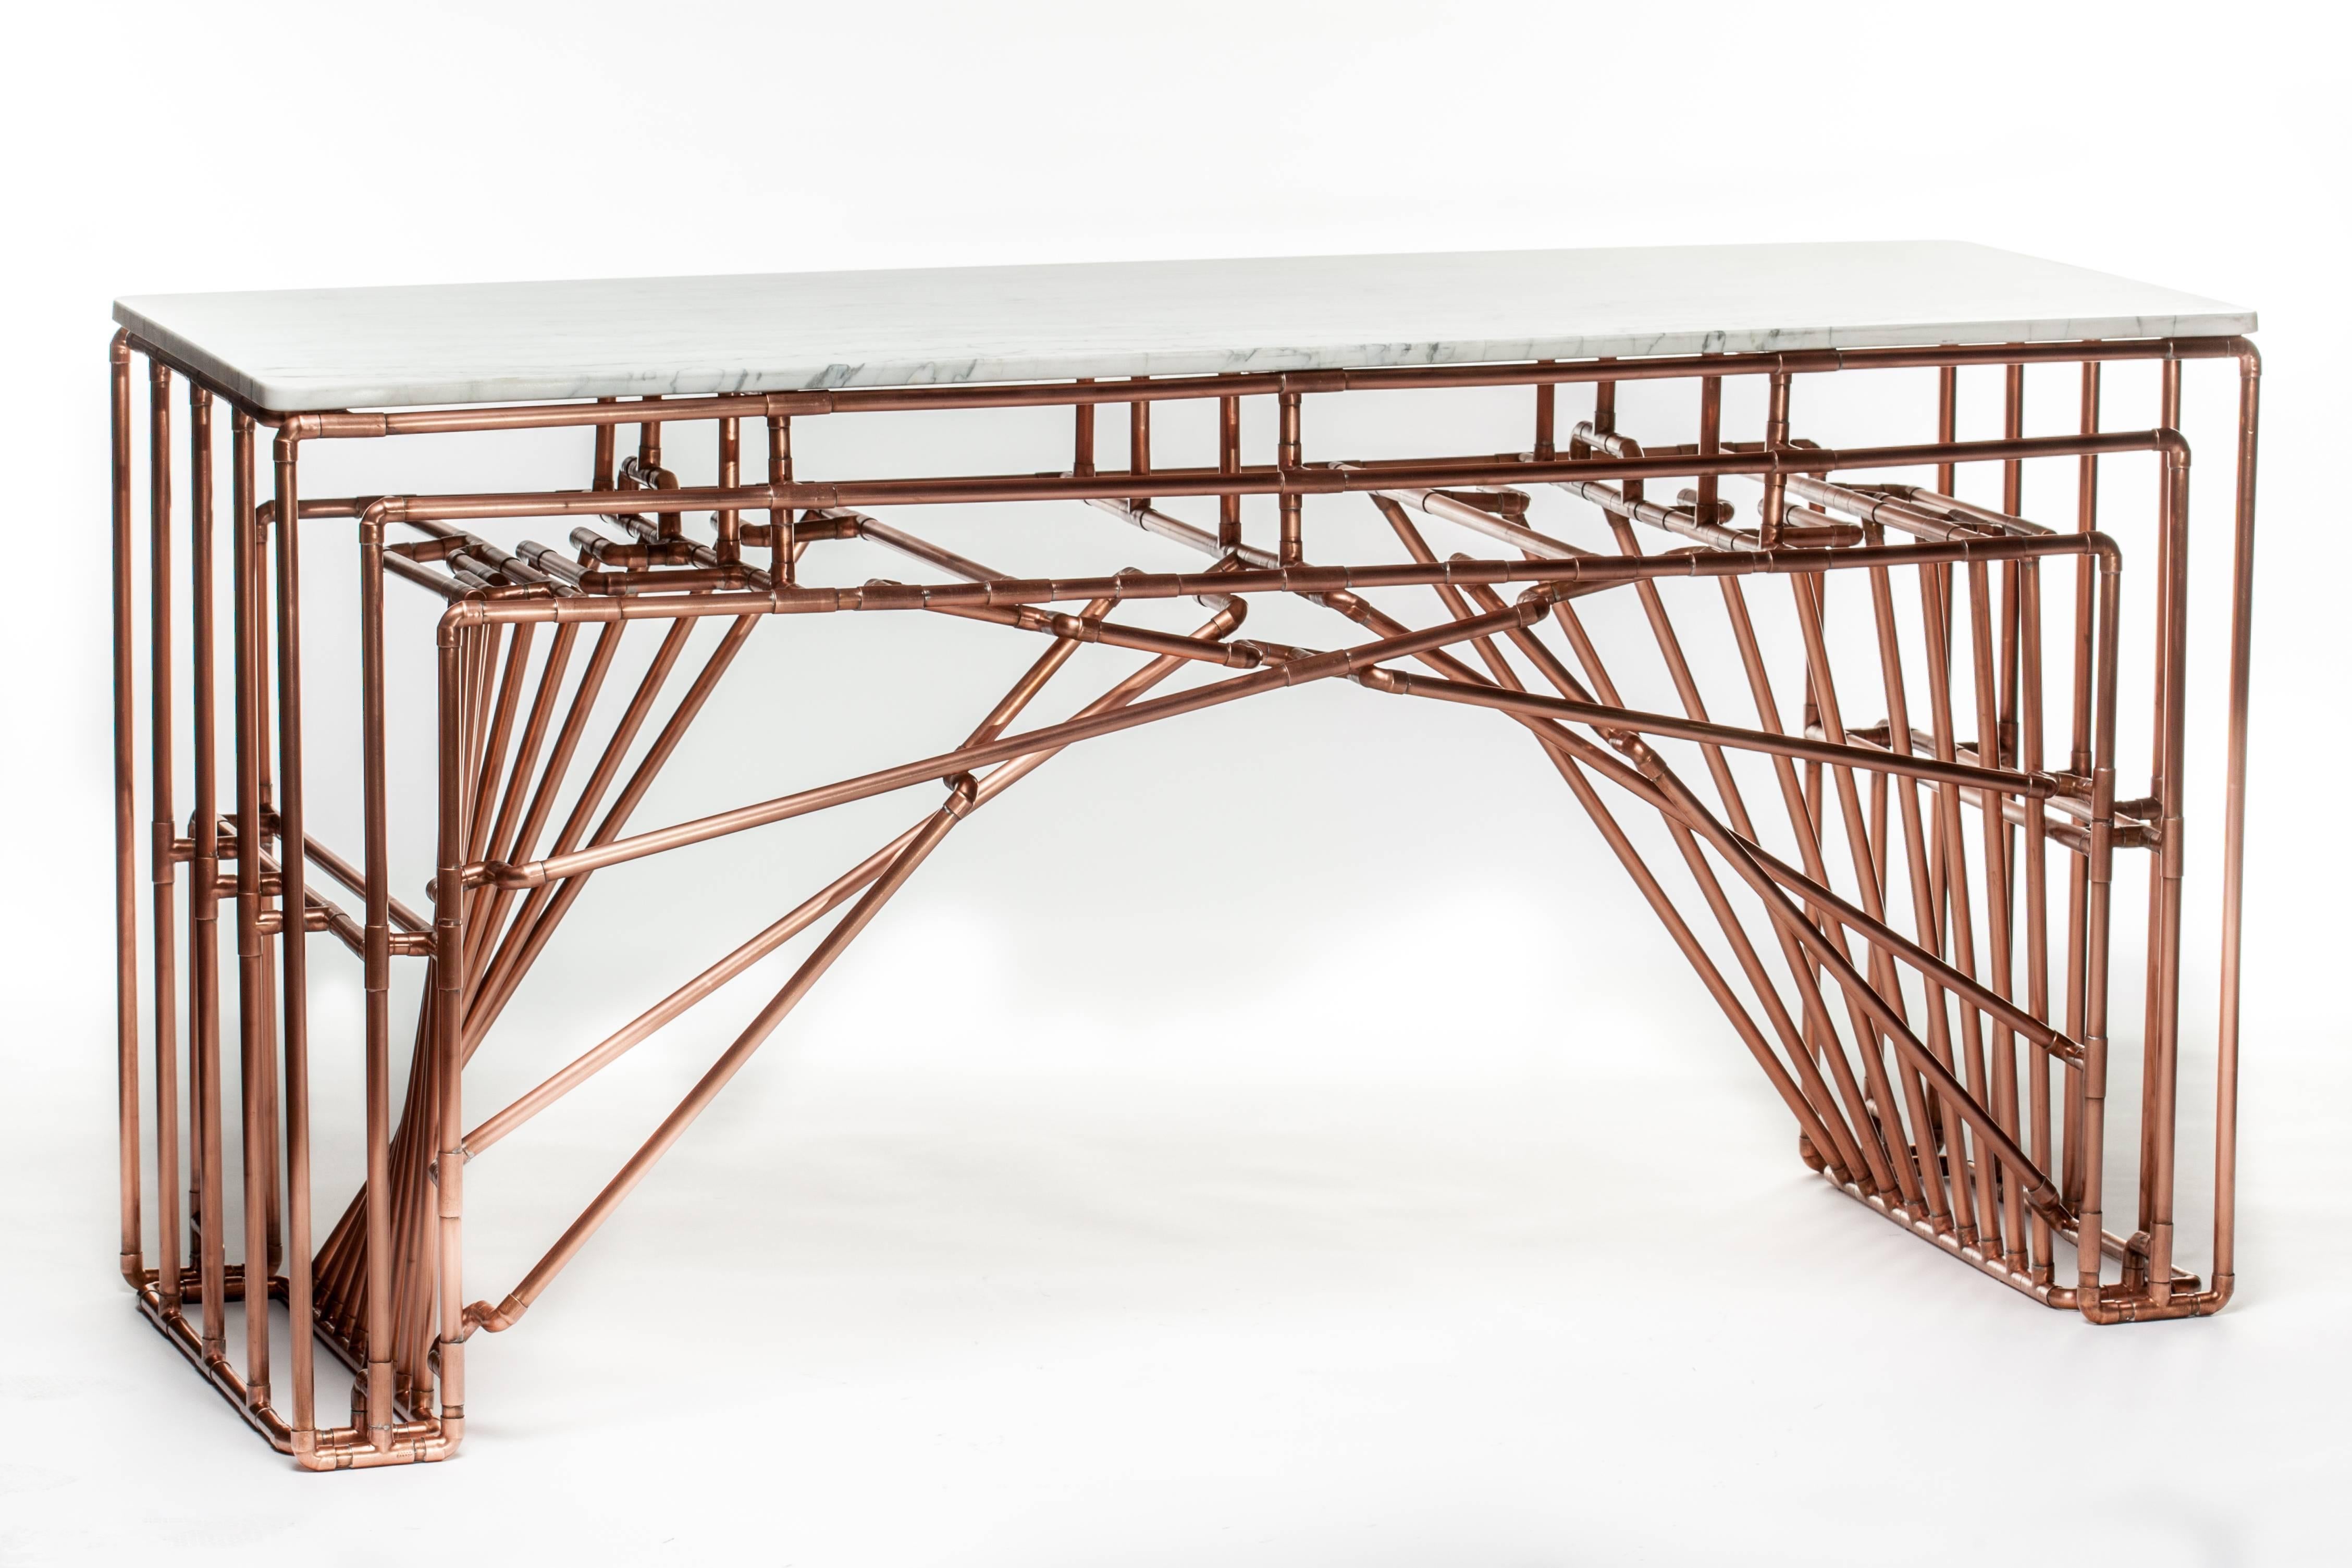 Title: Brooklyn-Barcelona Table
Year: 2013

The Brooklyn-Barcelona console table is a graceful merger of styles and continents. The under-arch is designed to evoke the iconic cabling of the Brooklyn Bridge and the negative space it creates is in